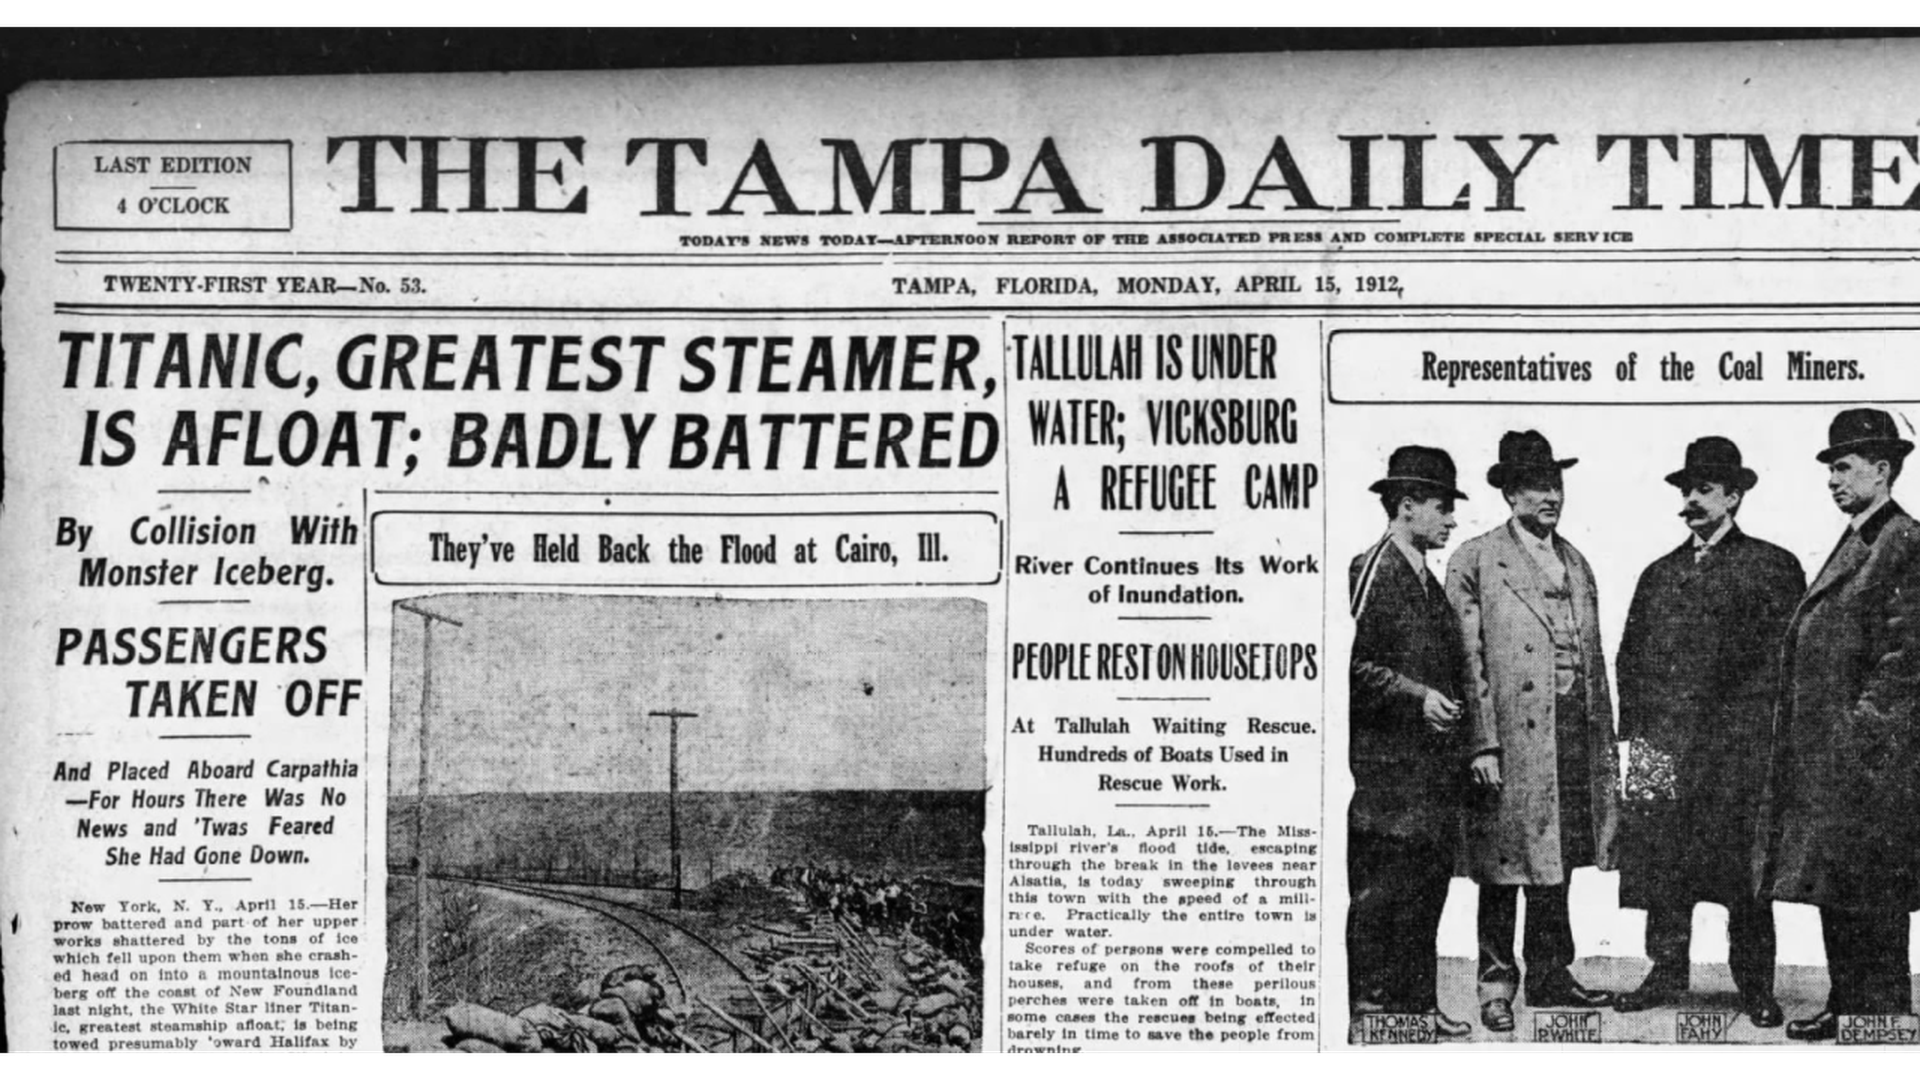 A newspaper clipping from the Tampa Daily Times with the headline "TITANIC, GREATEST STEAMER, IS AFLOAT; BADLY BATTERED"